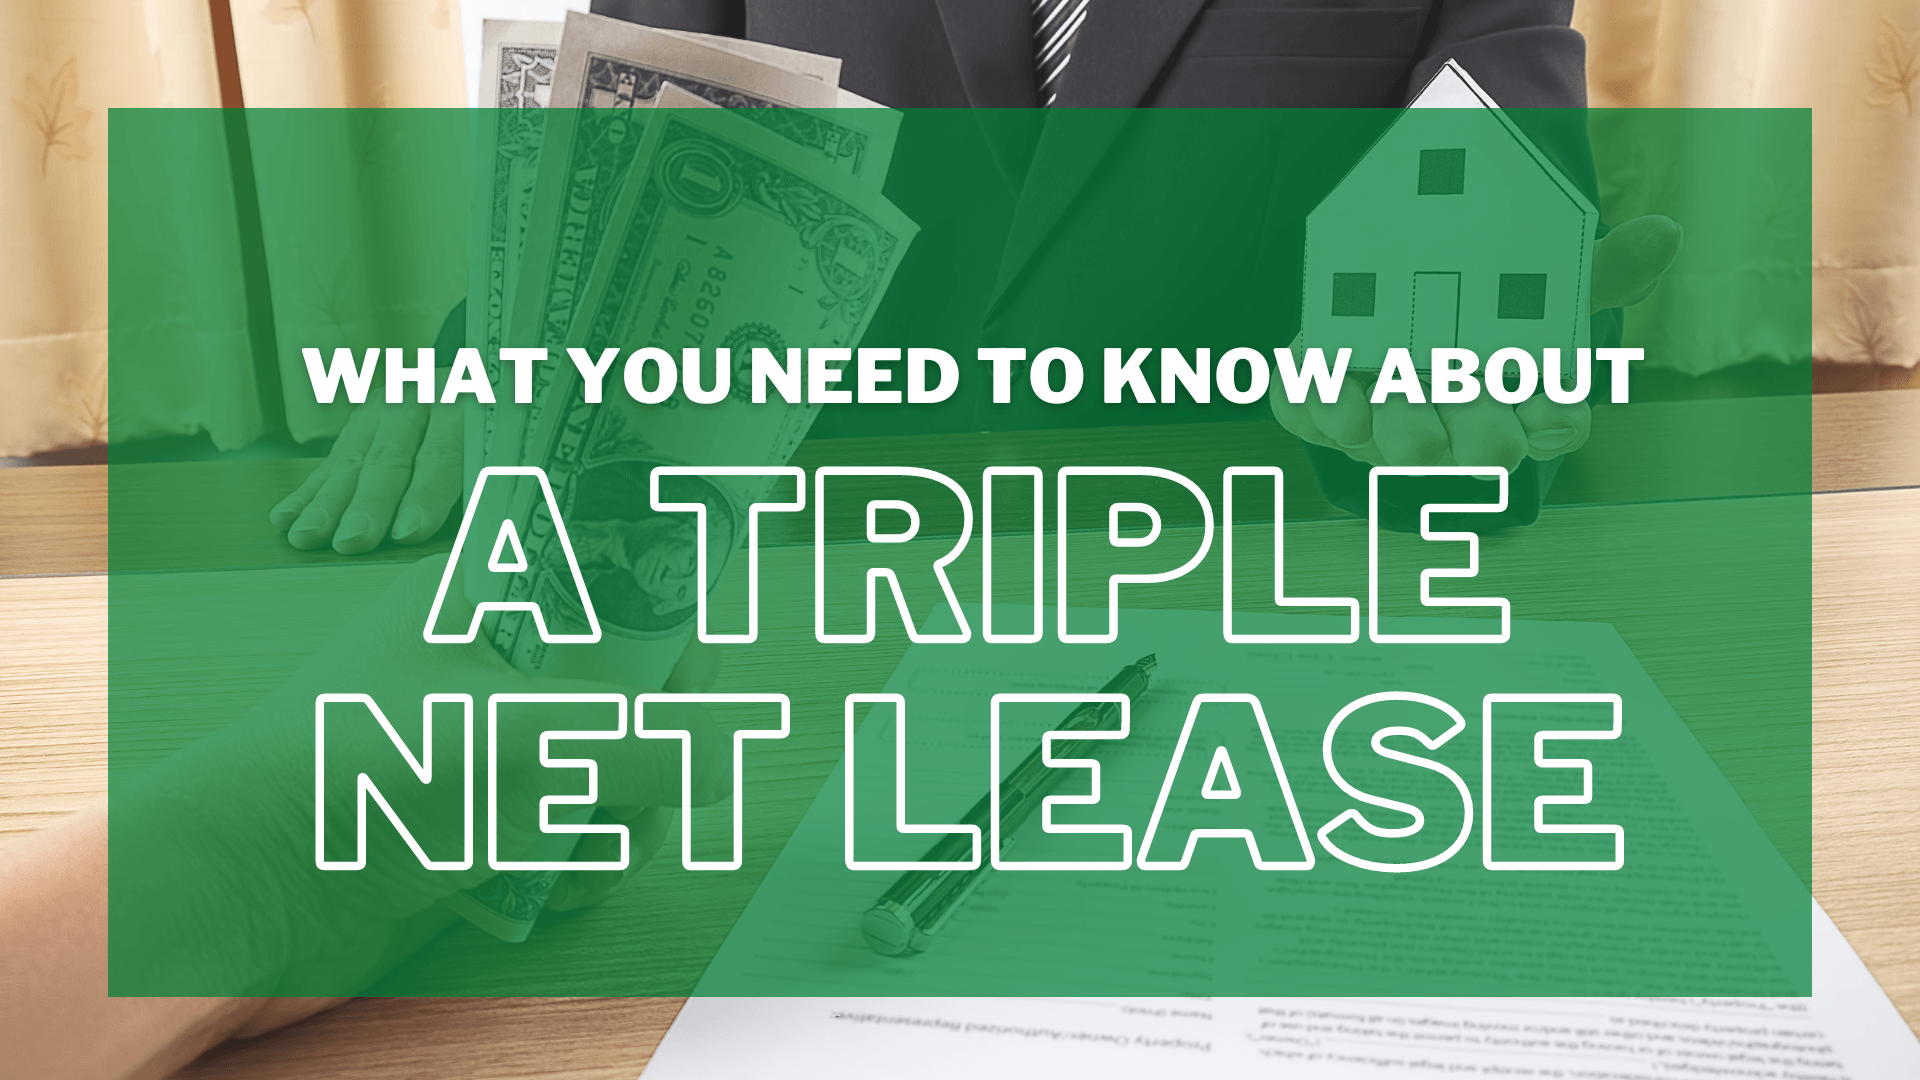 the topic of a triple net lease, what it involves, and its advantages and disadvantages